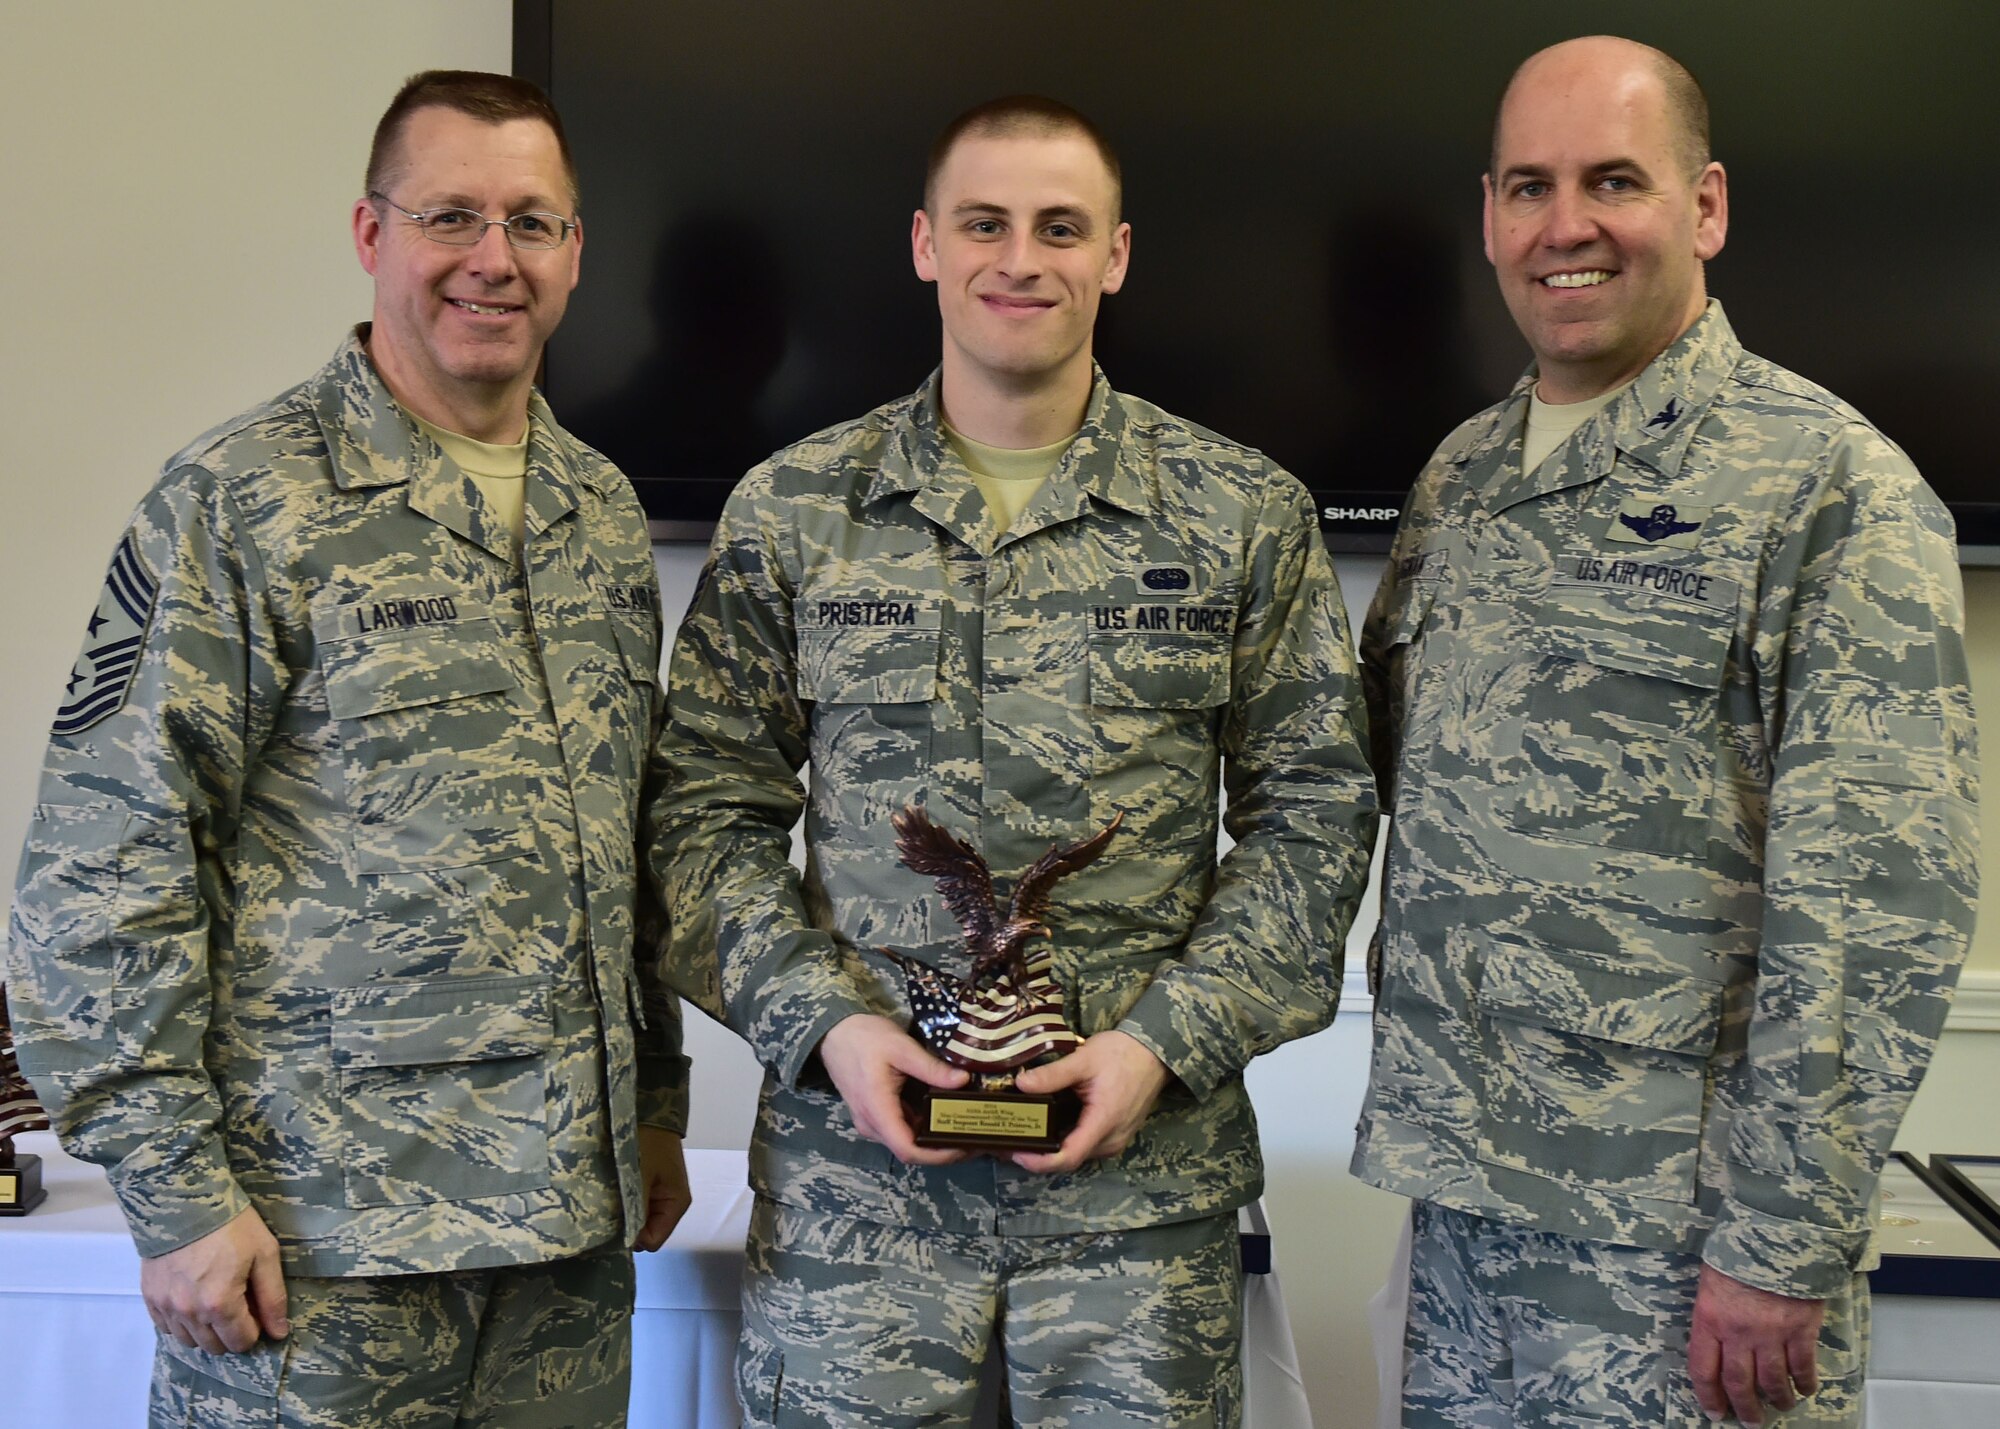 910th Airlift Wing 2014 Non-Commissioned Officer of the Year, Staff Sgt. Ronald Pristera, Jr., poses with 910th Airlift Wing Command Chief Master Sgt. Steven Larwood and 910th Airlift Wing Commander Col. James Dignan, after receiving his award at a ceremony April 12. Pristera is cyber systems operations specialist with the 910th Communications Squadron. (U.S. Air Force photo/Senior Airman Rachel Kocin)